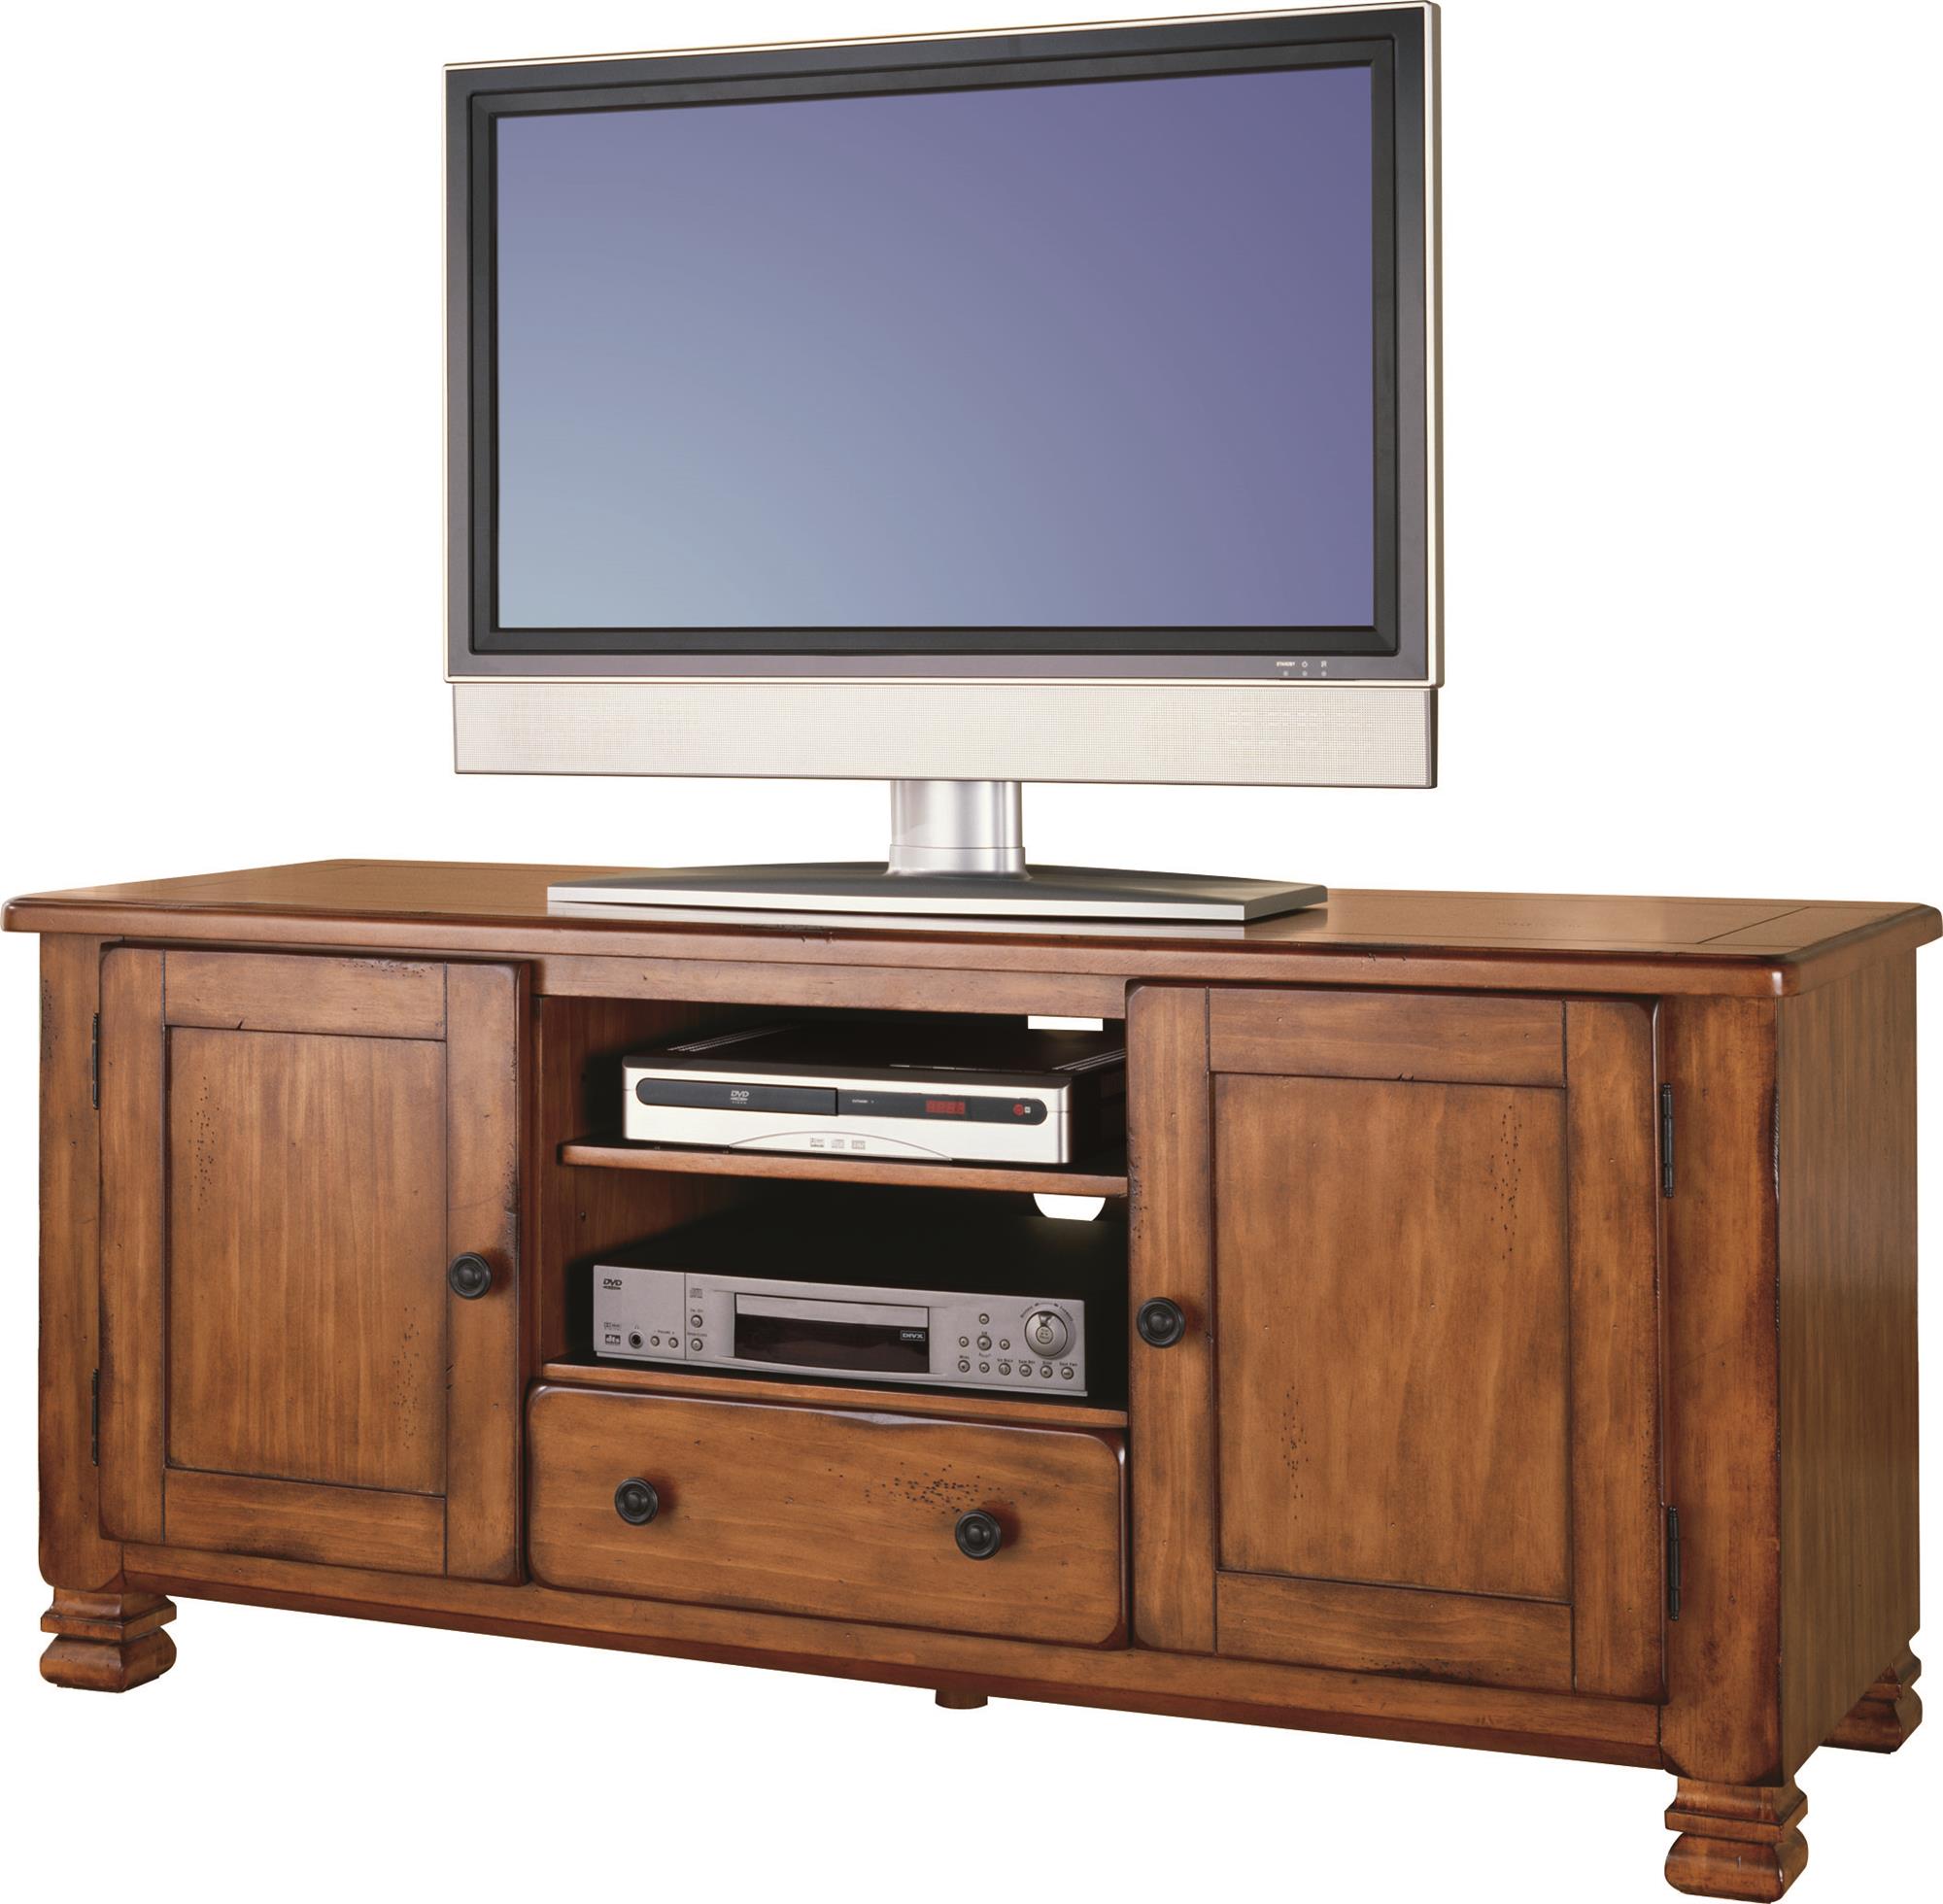 Ameriwood Home Summit Mountain Wood Veneer TV Stand for TVs up to 55" Wide, Medium Brown - image 1 of 9